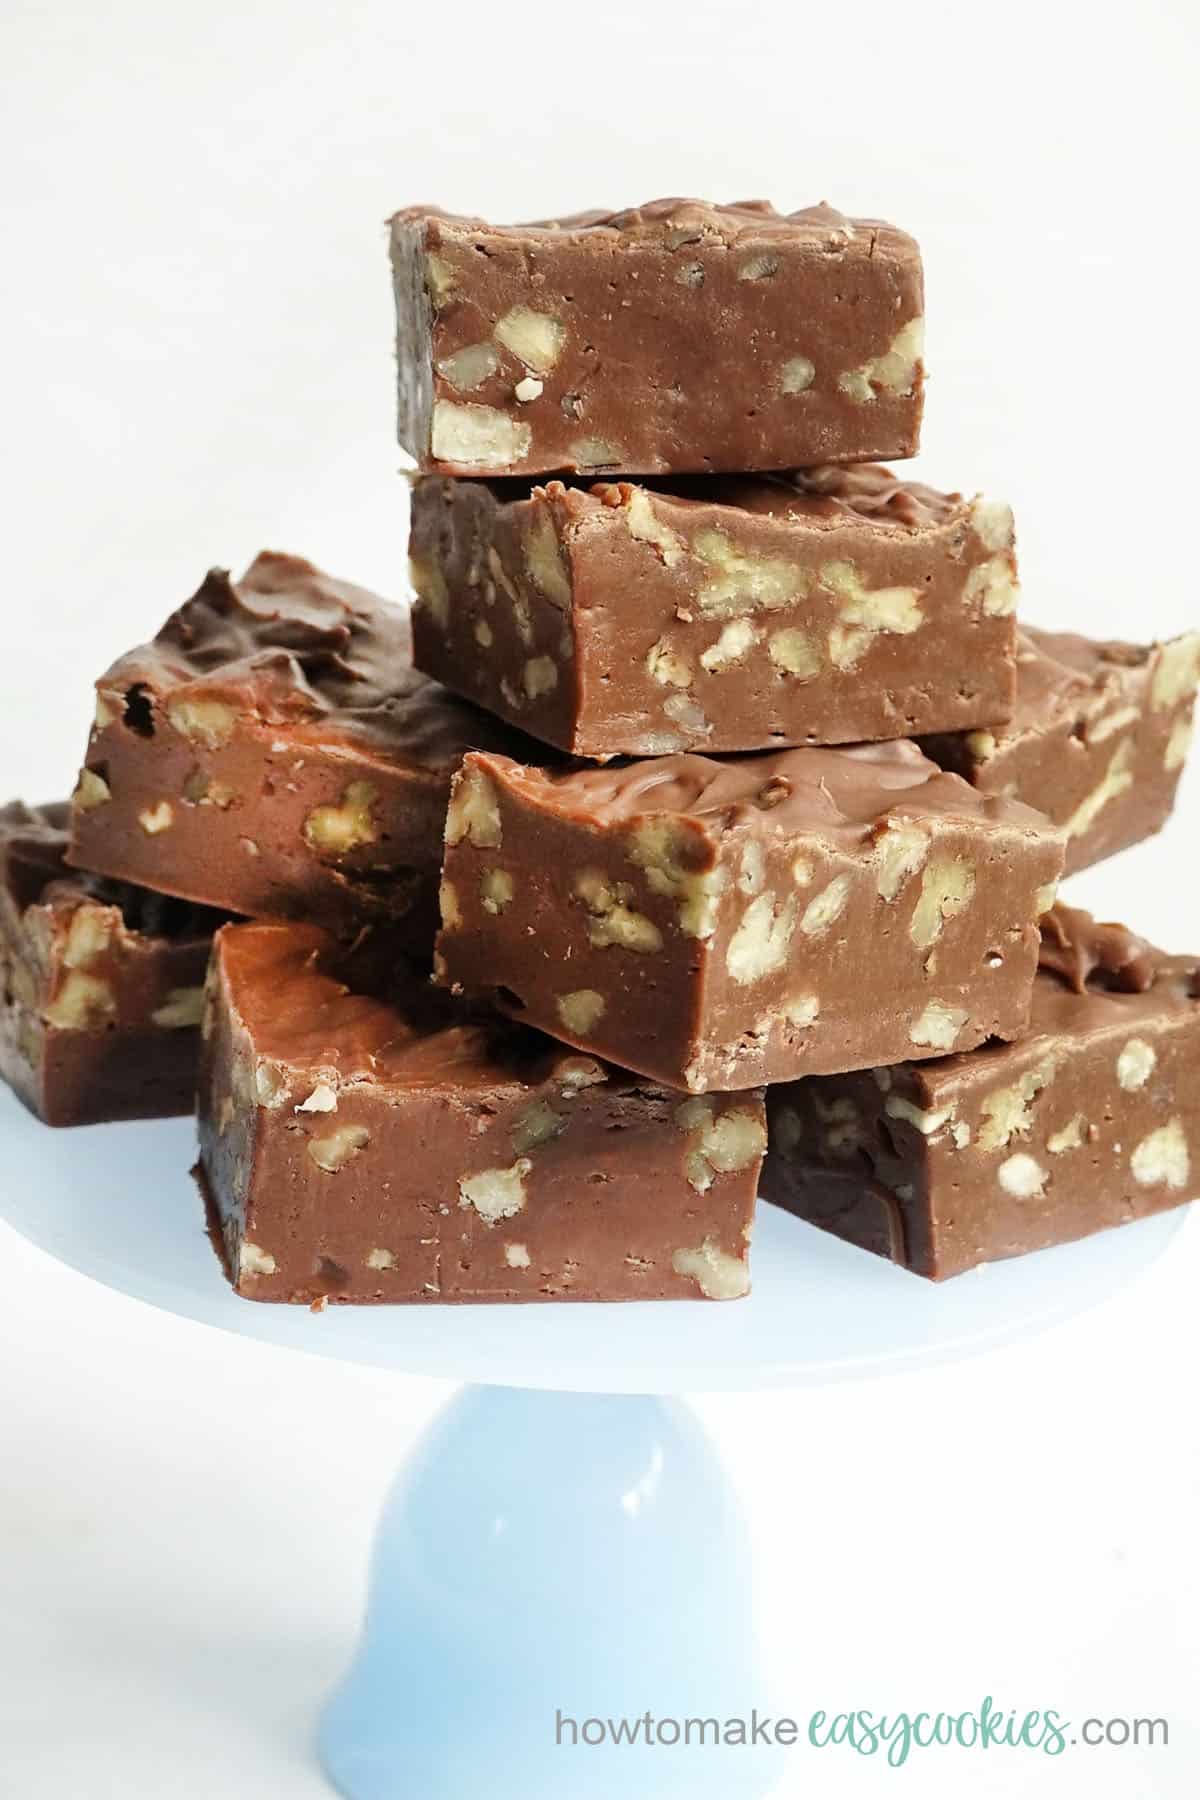 chocolate fudge with pecans or nuts